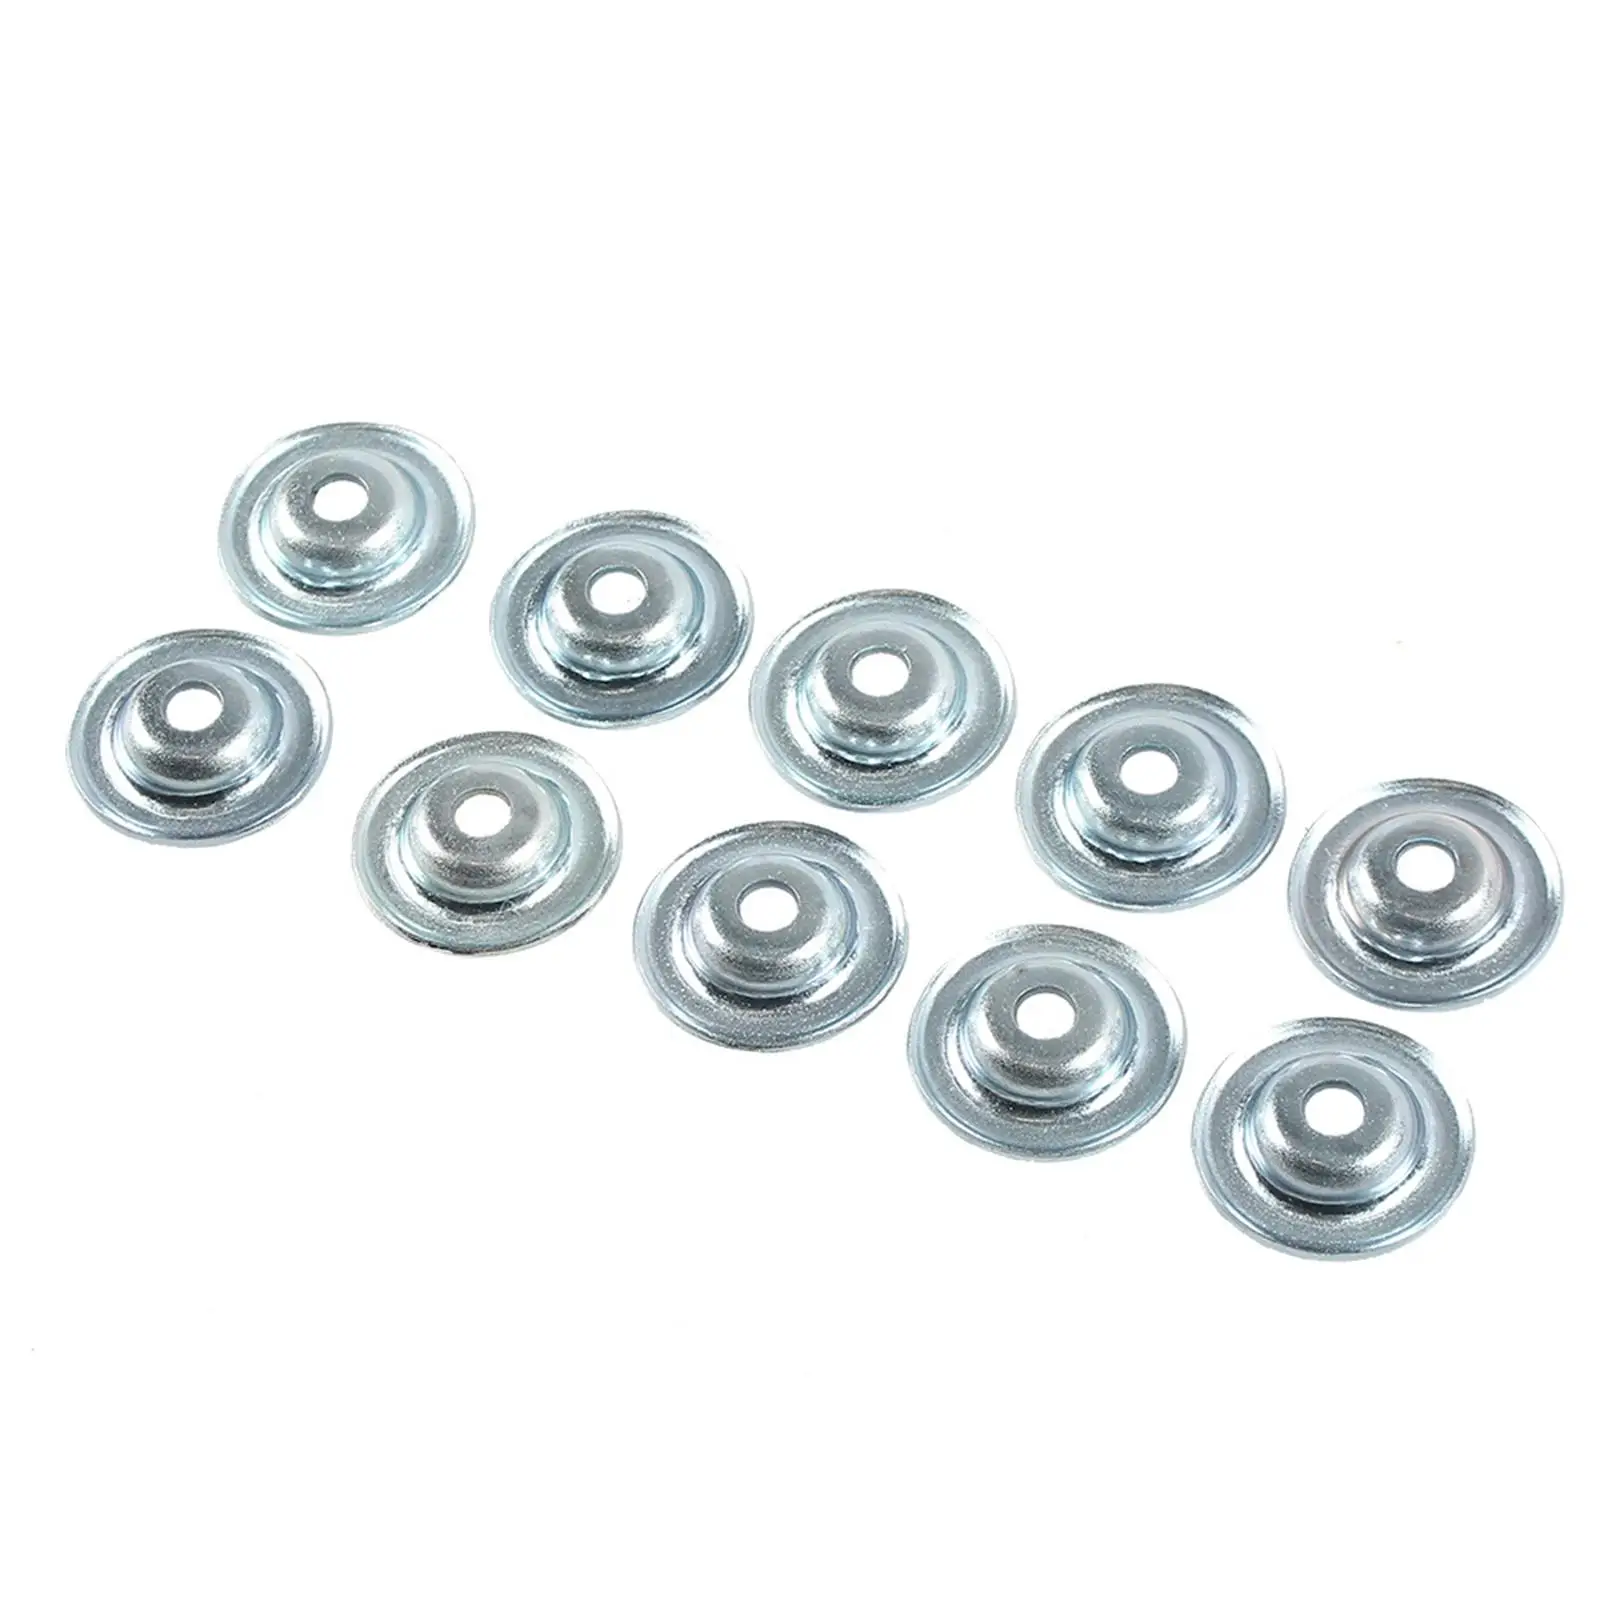 Bolts & Washers Set for UTV Fit for RS1 RZR 500 1000